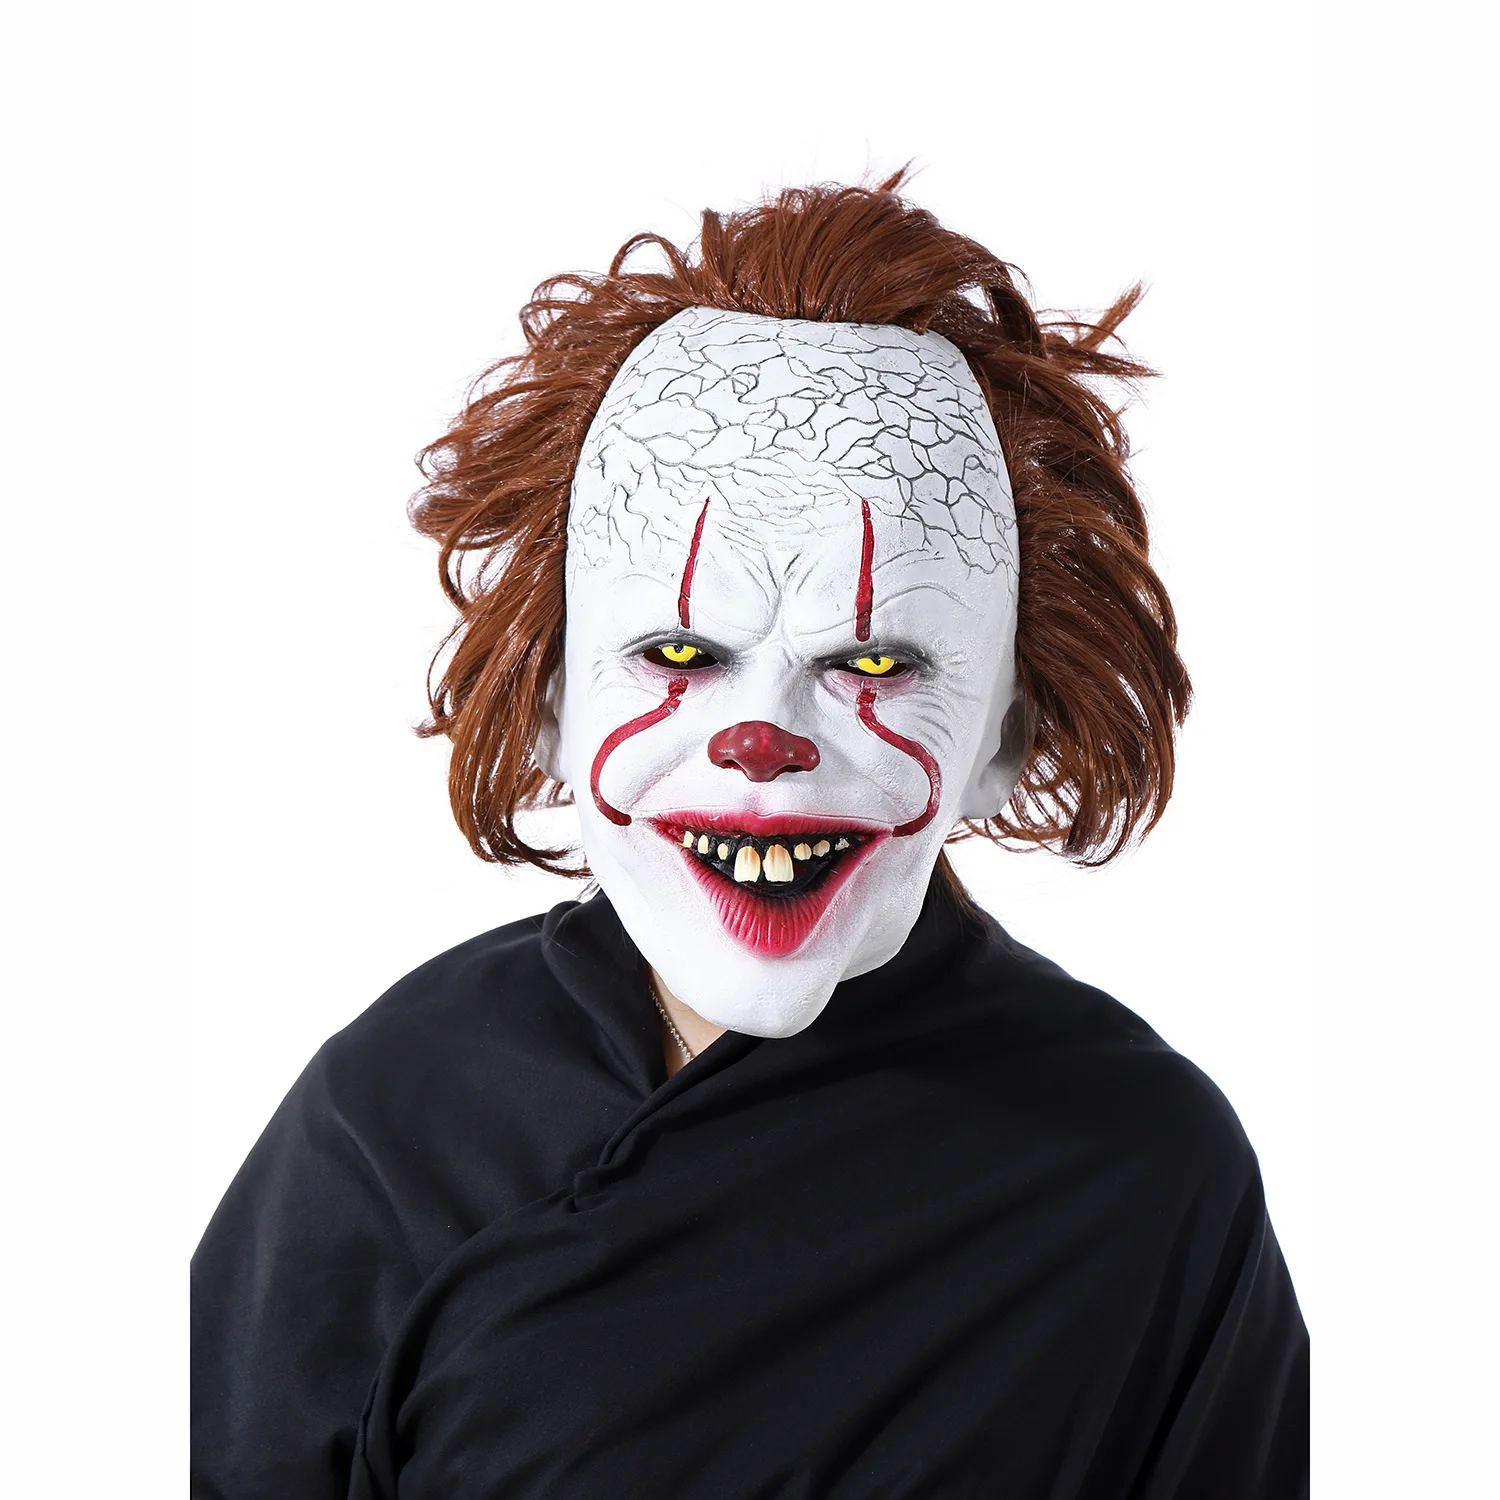 

Joker Crazy Creepy Scary Halloween Clown Mask - Sinister Smile Red Hair Latex Killer Movie Cosplay Props Adult Latex Full Head